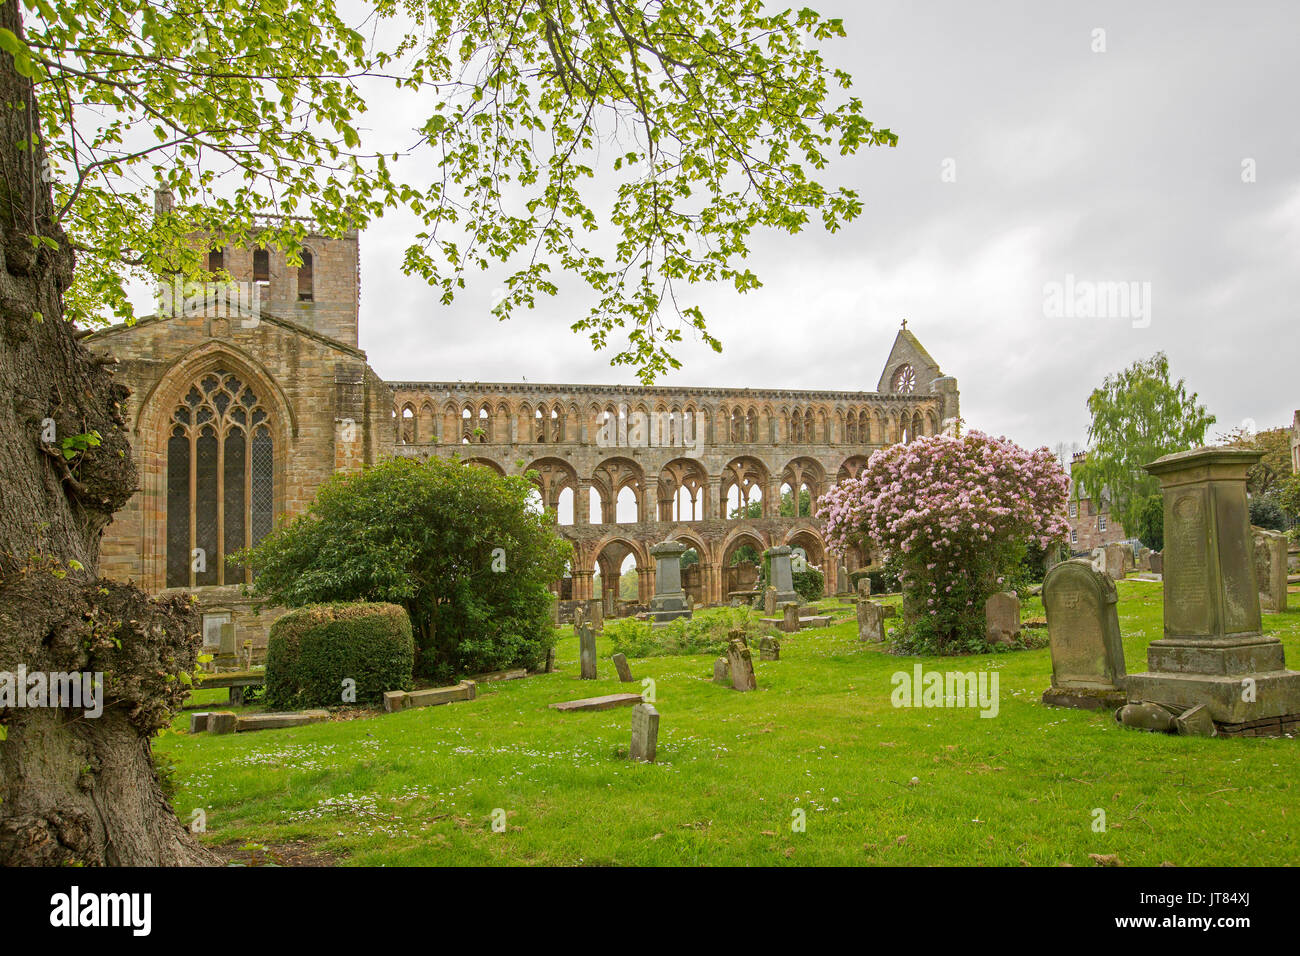 Ornate and imposing ruins of Jedburgh abbey with graveyard, trees, and flowering shrubs, in Scotland Stock Photo